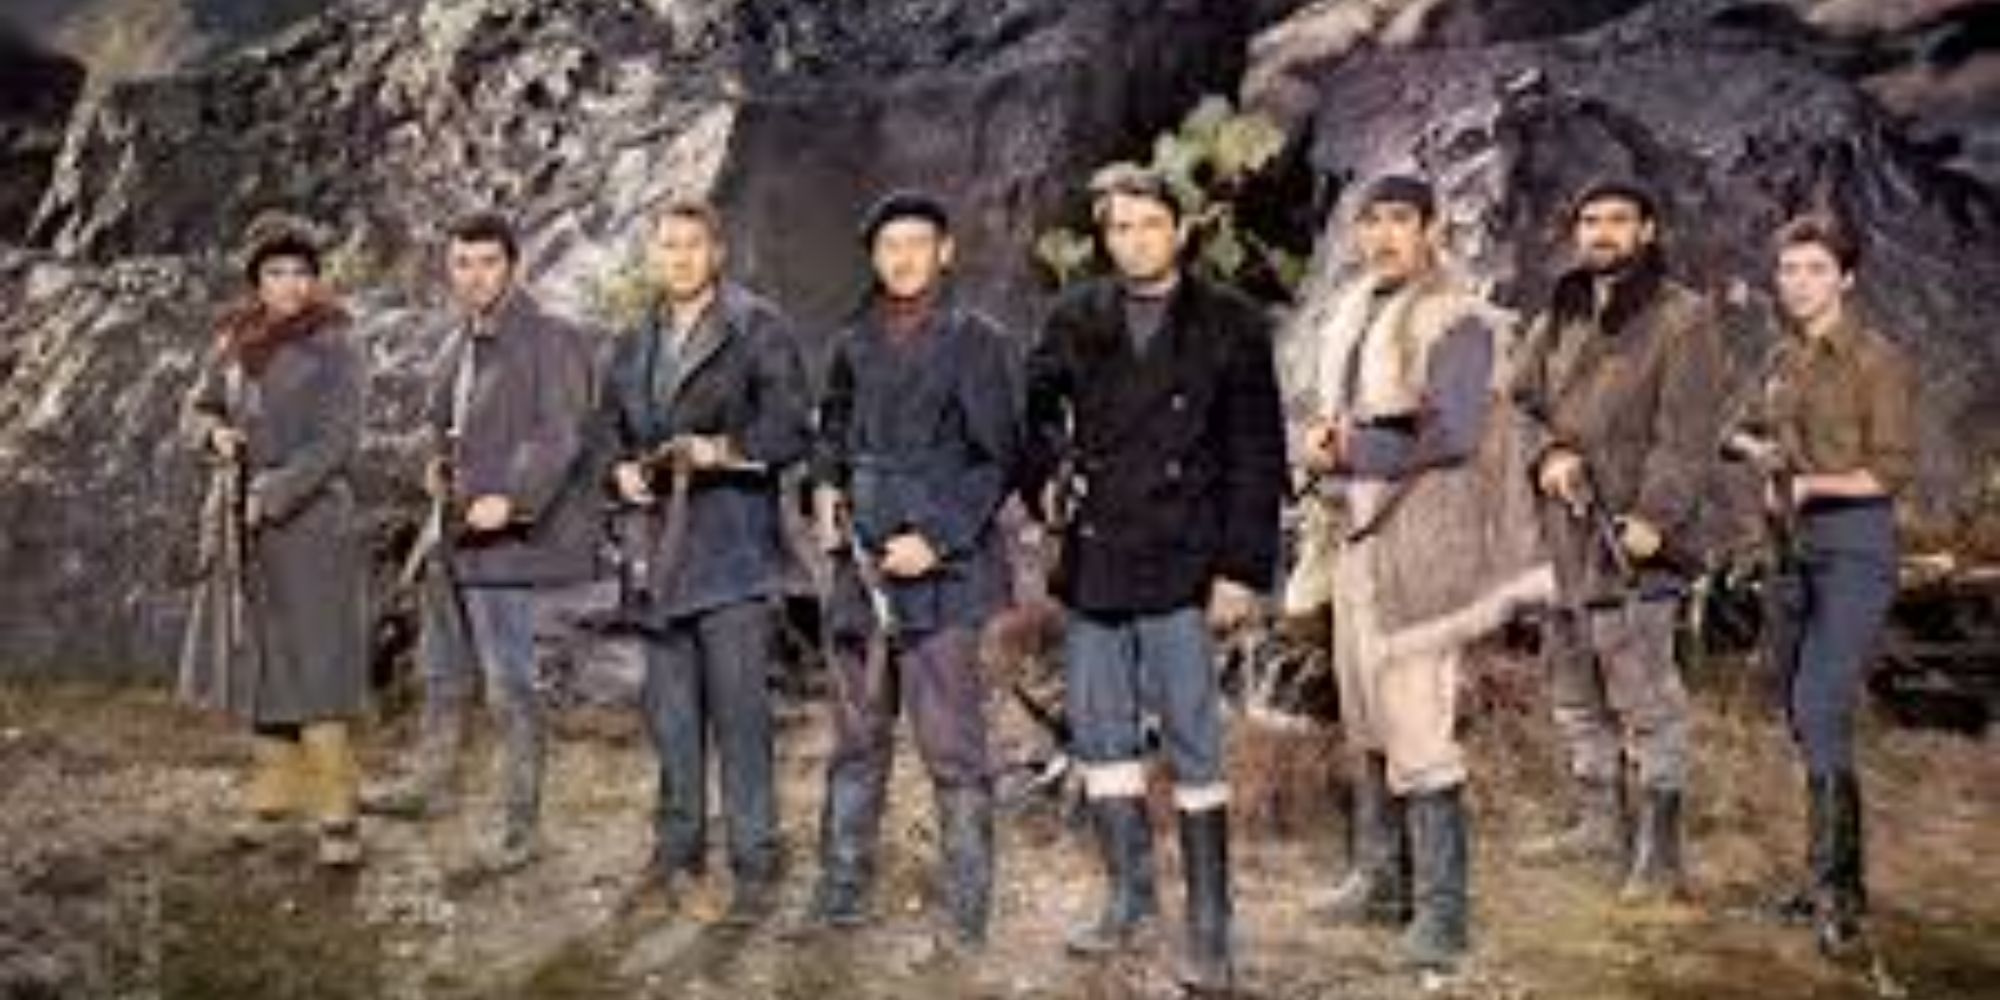 The Allied Commando team from 'The Guns of Navarone' (1961)